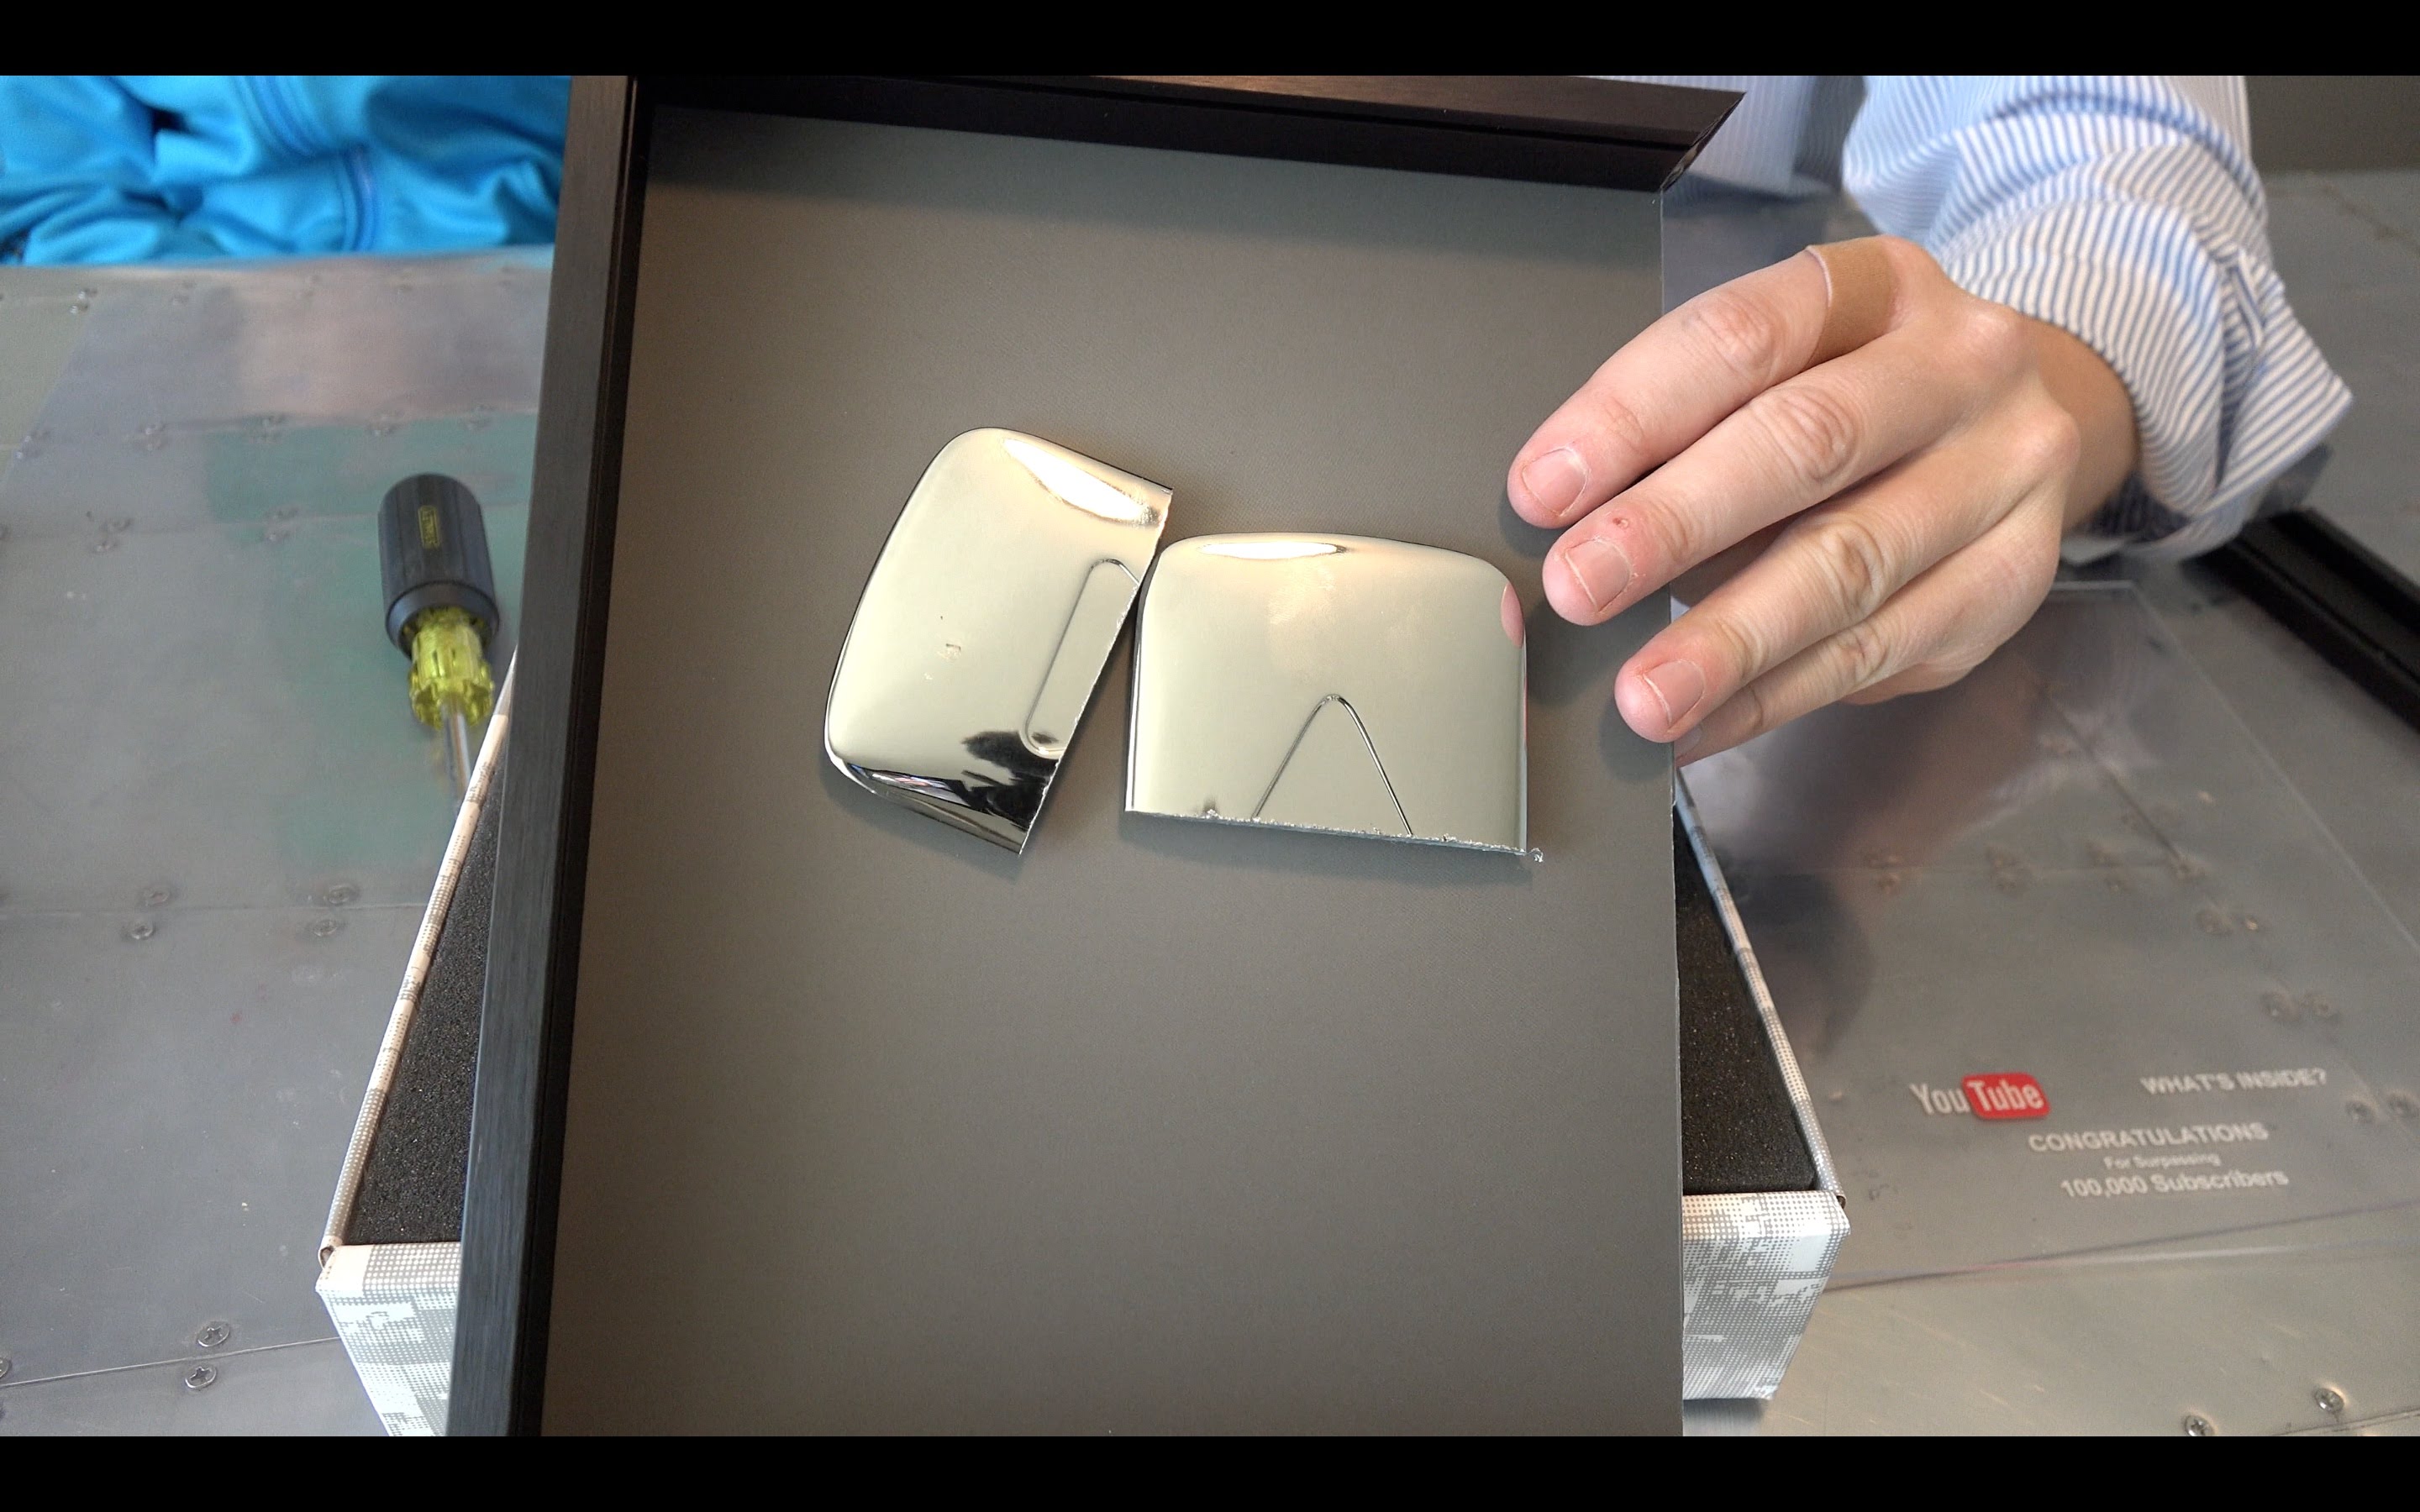 Inside the YouTube play button